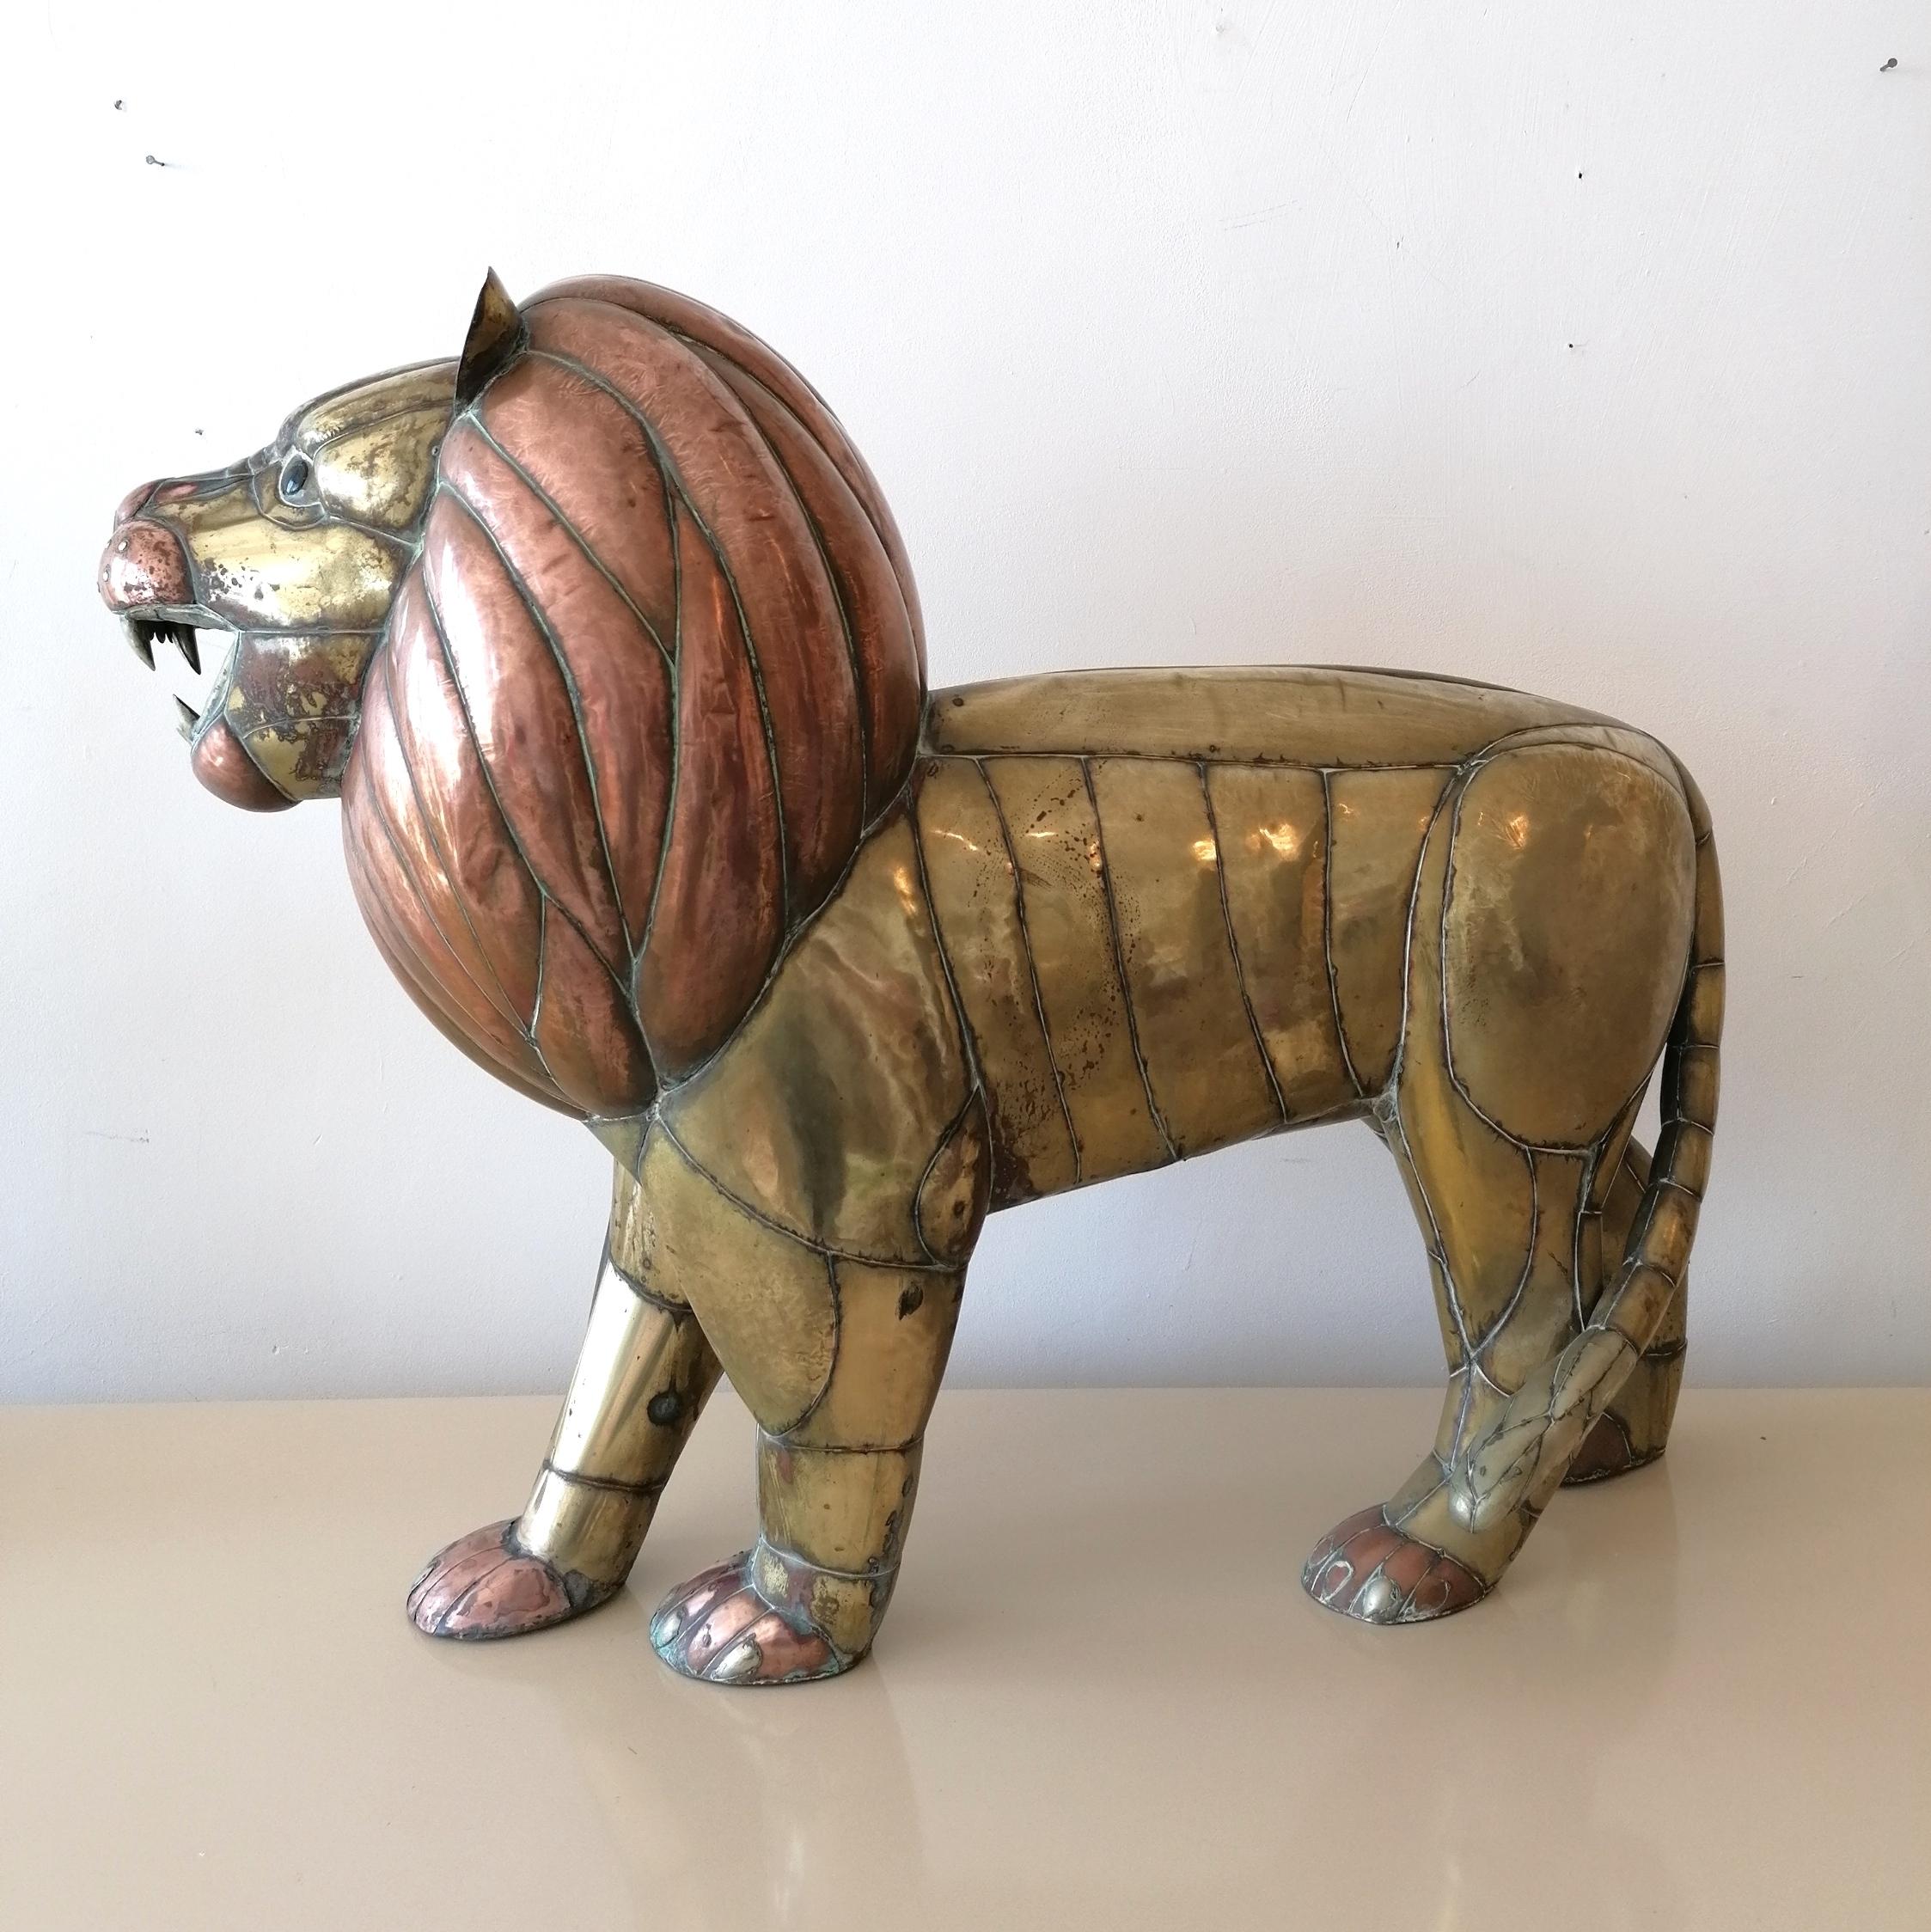 A monumental lion sculpture by renowned Mexican artist Sergio Bustamante 1970s. The figure is modelled from an intricate welded patchwork of brass & copper sheet. Lion has glass eyes.
No signature, but this is fairly common with the metal